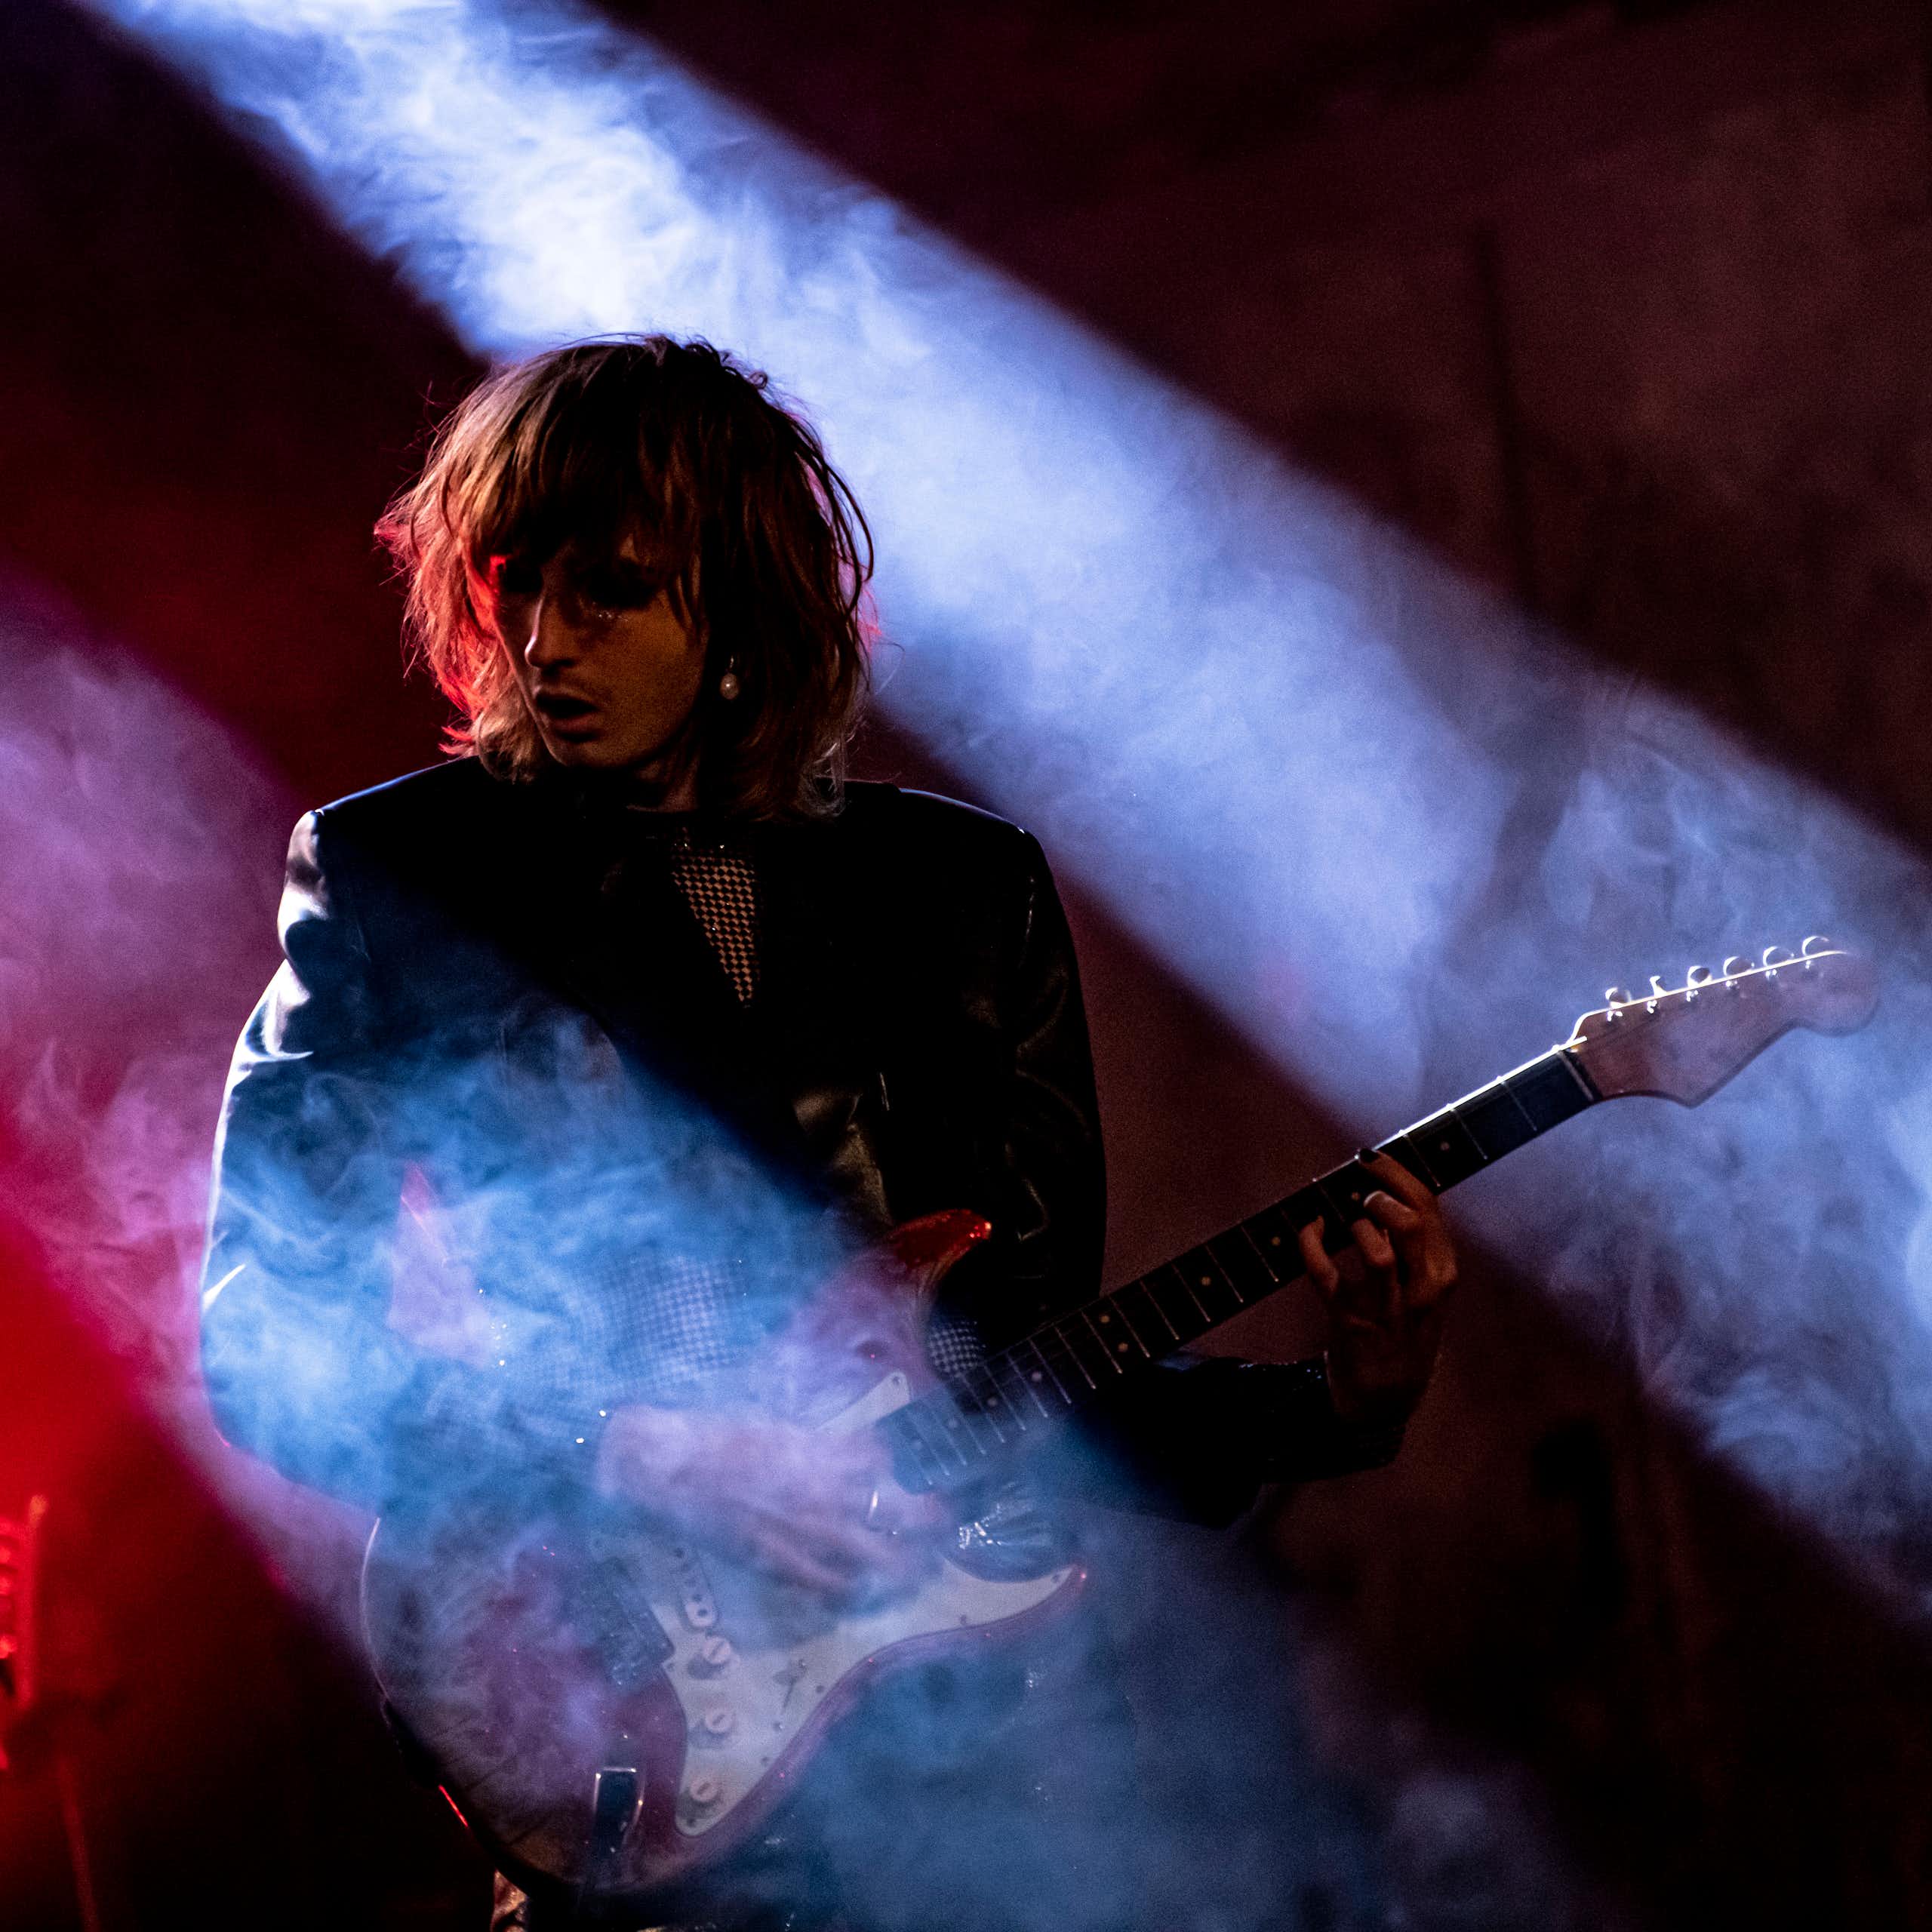 Guitar player bathed in red and blue lights and fog.